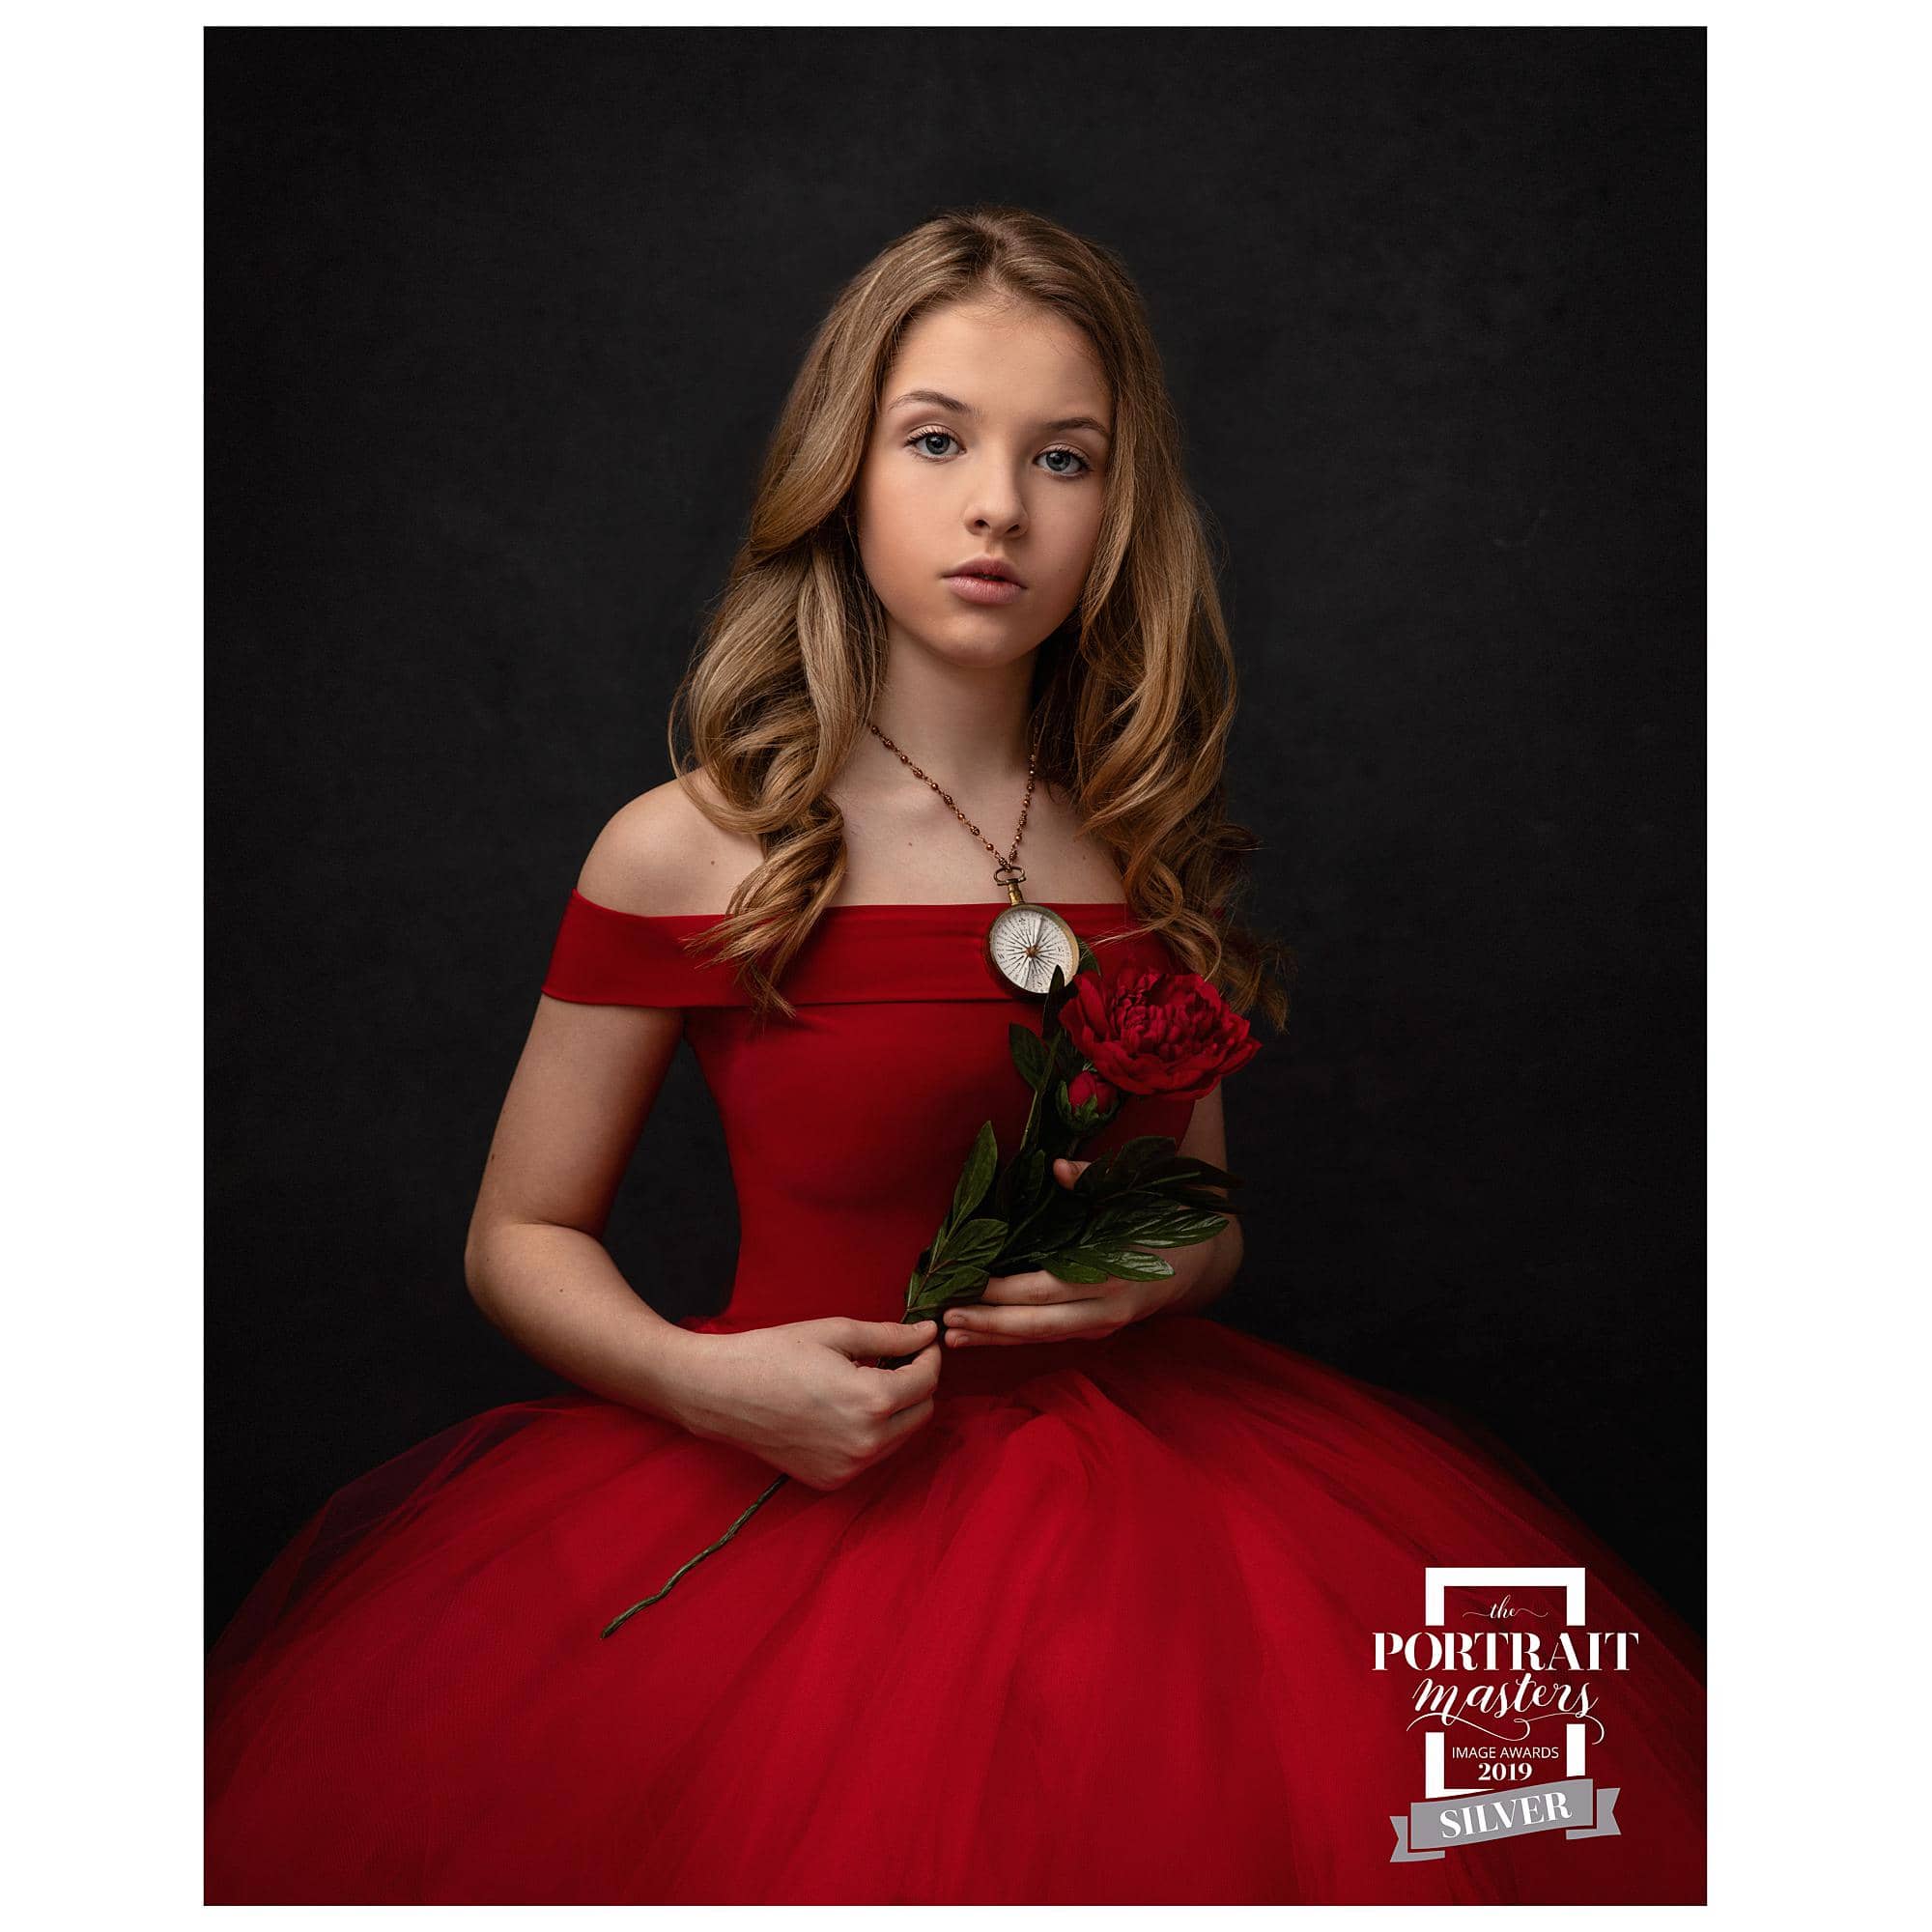 Portrait of a Girl in a red dress holding a red rose wins a silver award at the Portrait Masters